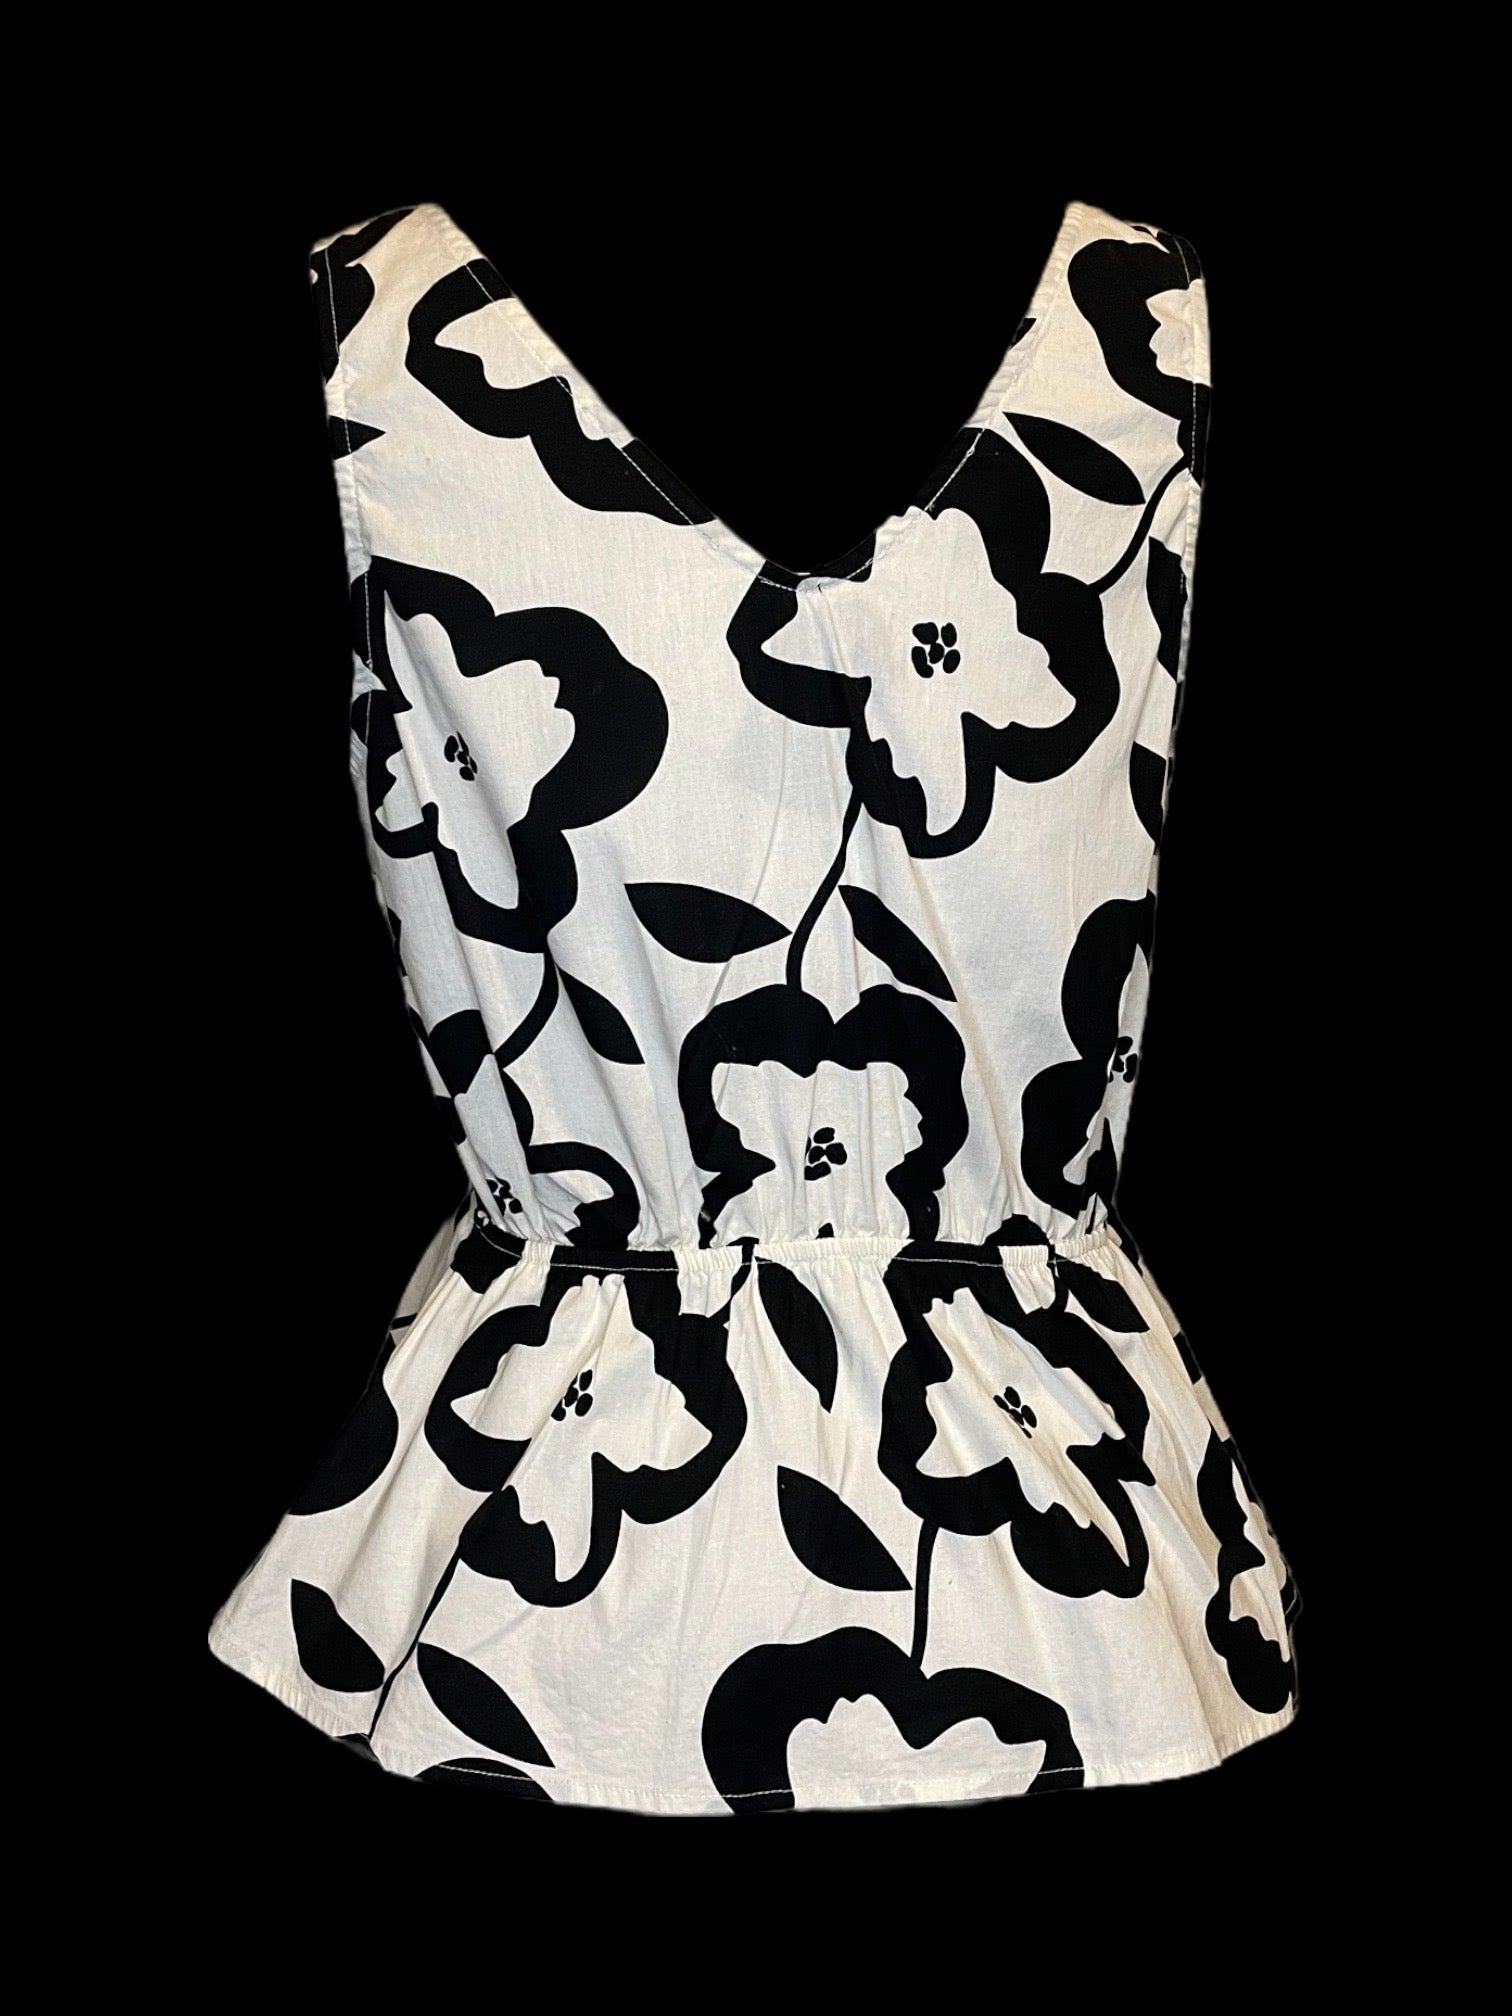 NWT LOUIS VUITTON Ivory White CUT OUT FLORAL Top SLEEVELESS BLOUSE